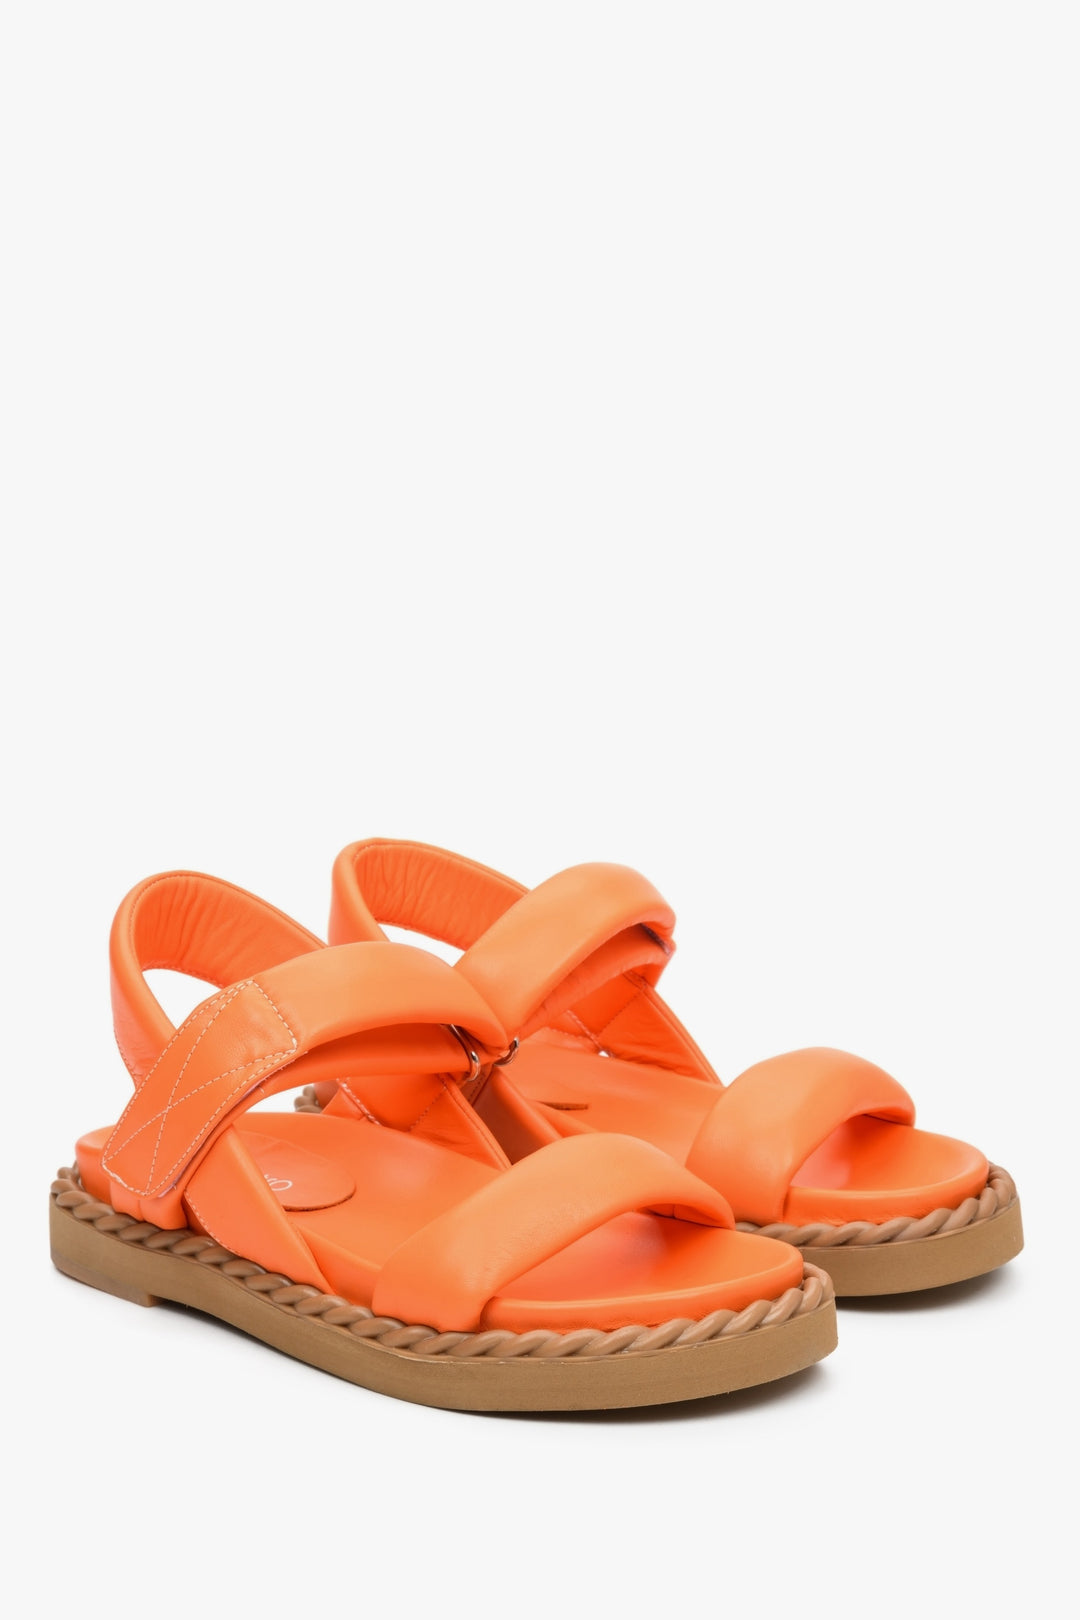 Women's sandals for summer in orange colour made of natural leather on a comfortable sole.